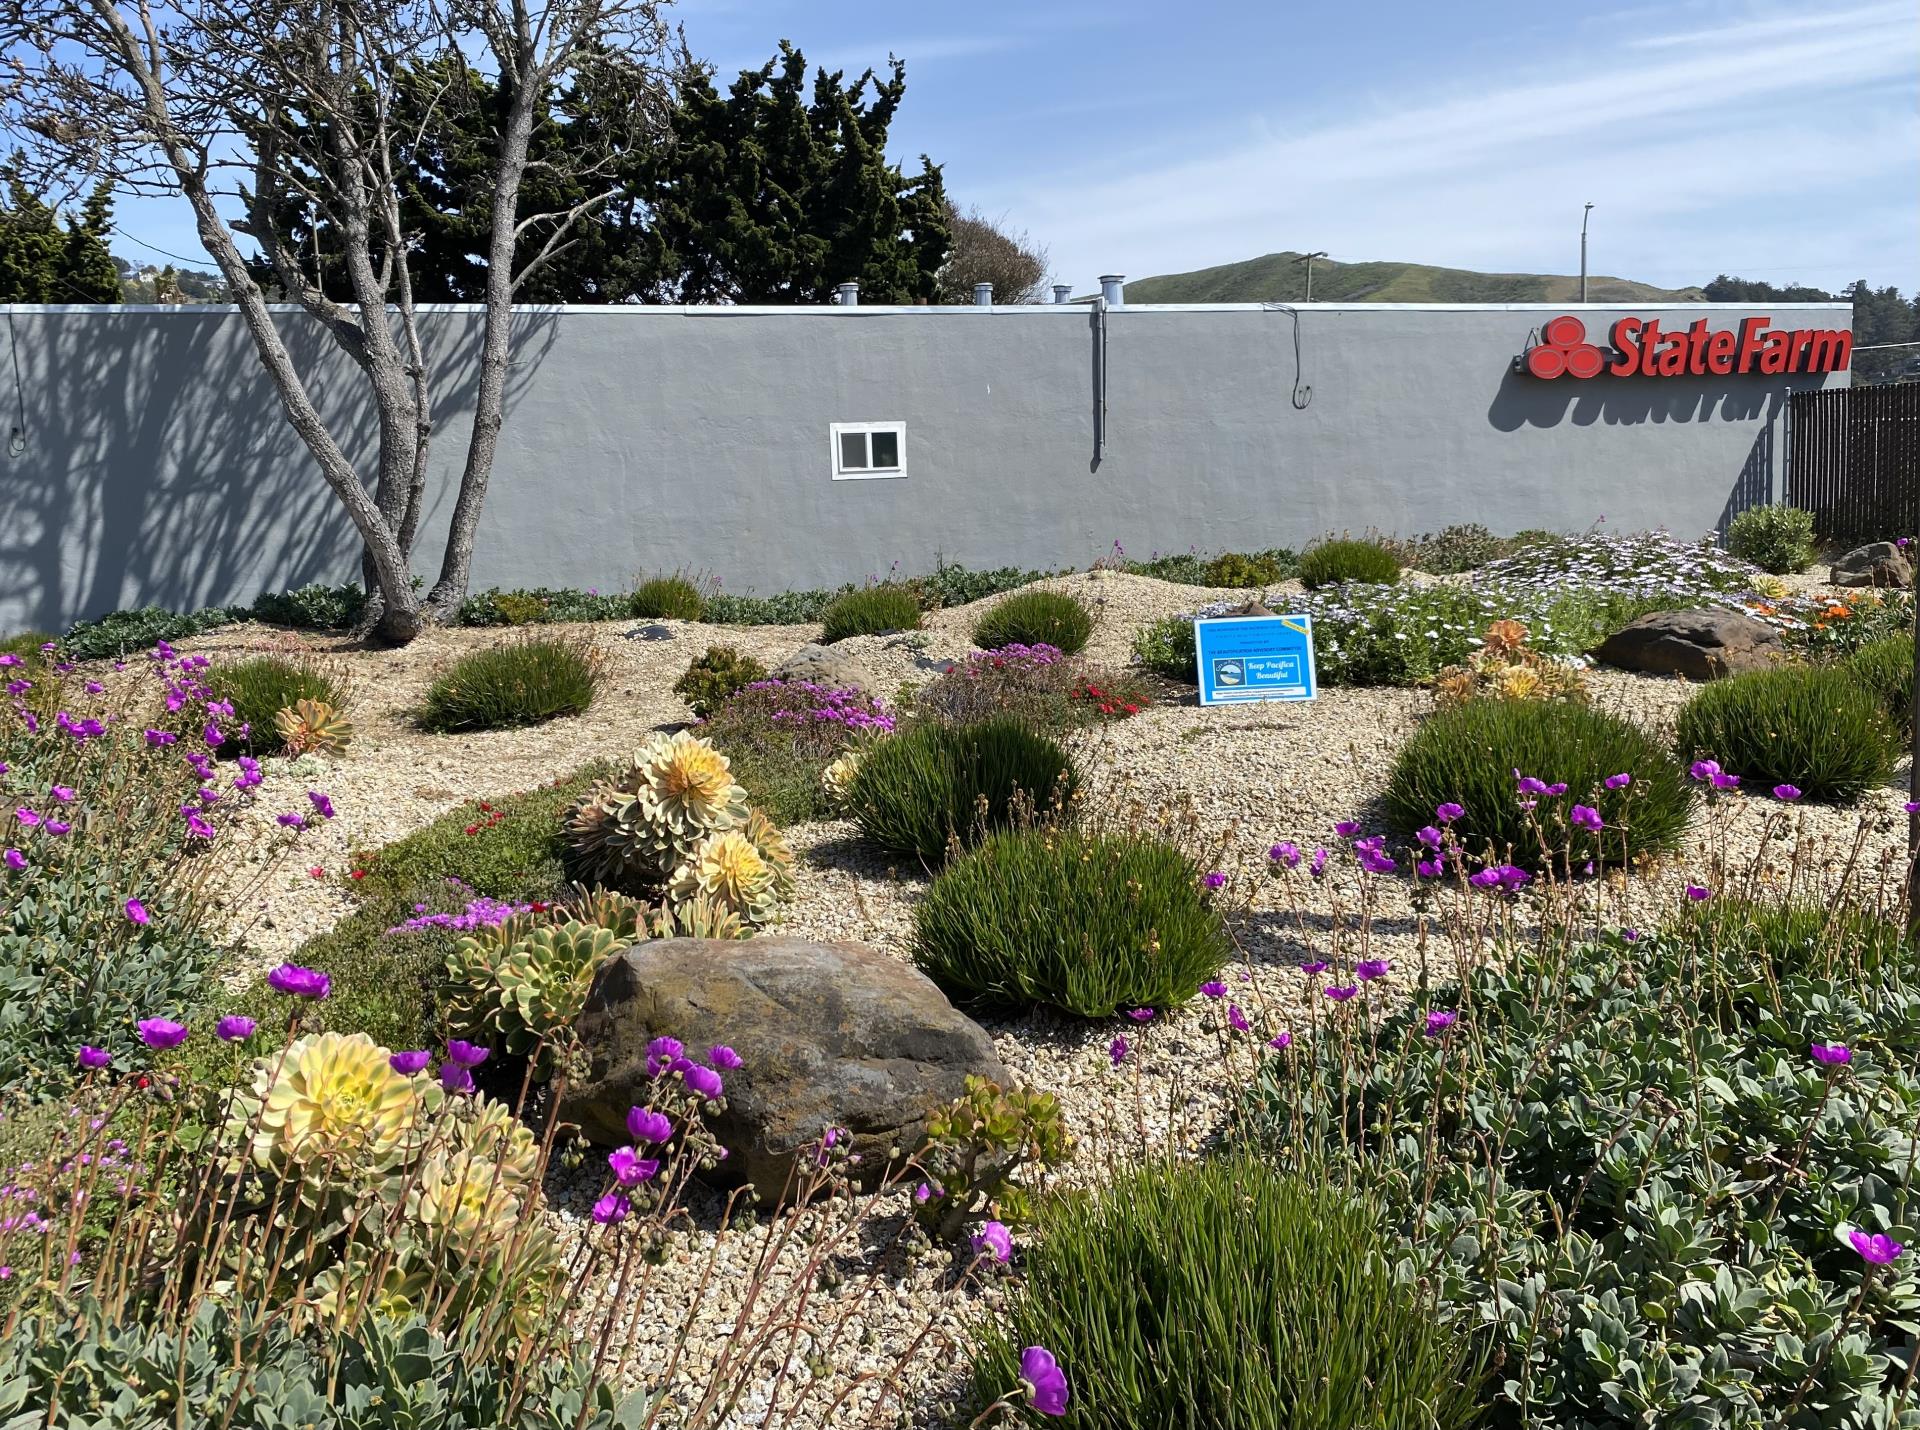 Pacifica Beautification Award for Commerical Building State Farm Landscape